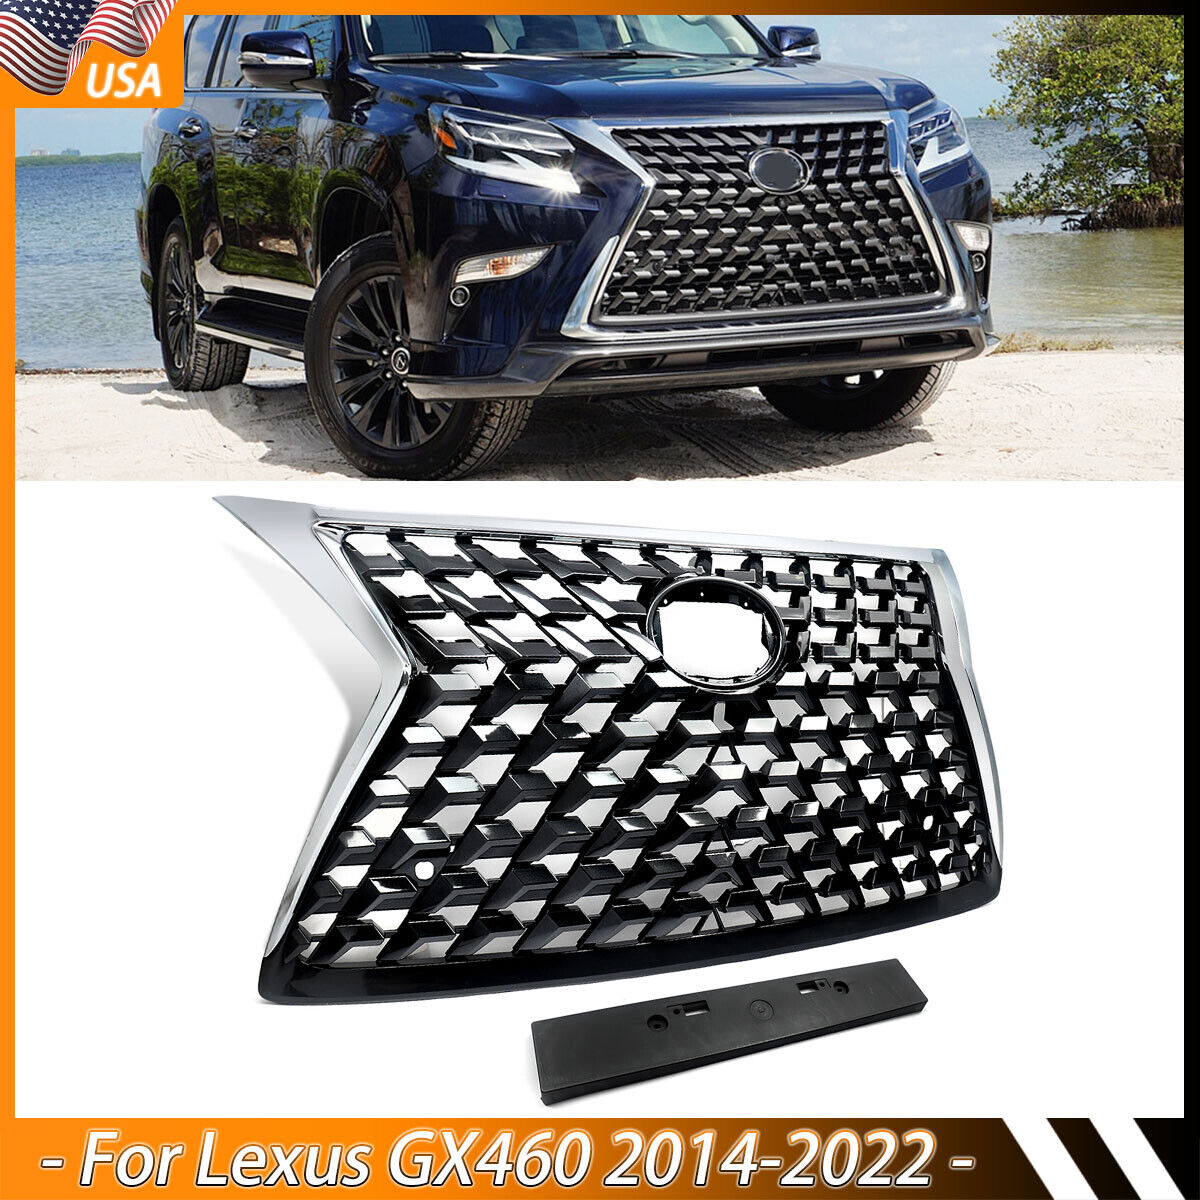 NEW Upgrade Luxury Chrome Grille For 2014-2022 Lexus GX460 Front Upper Grill USA